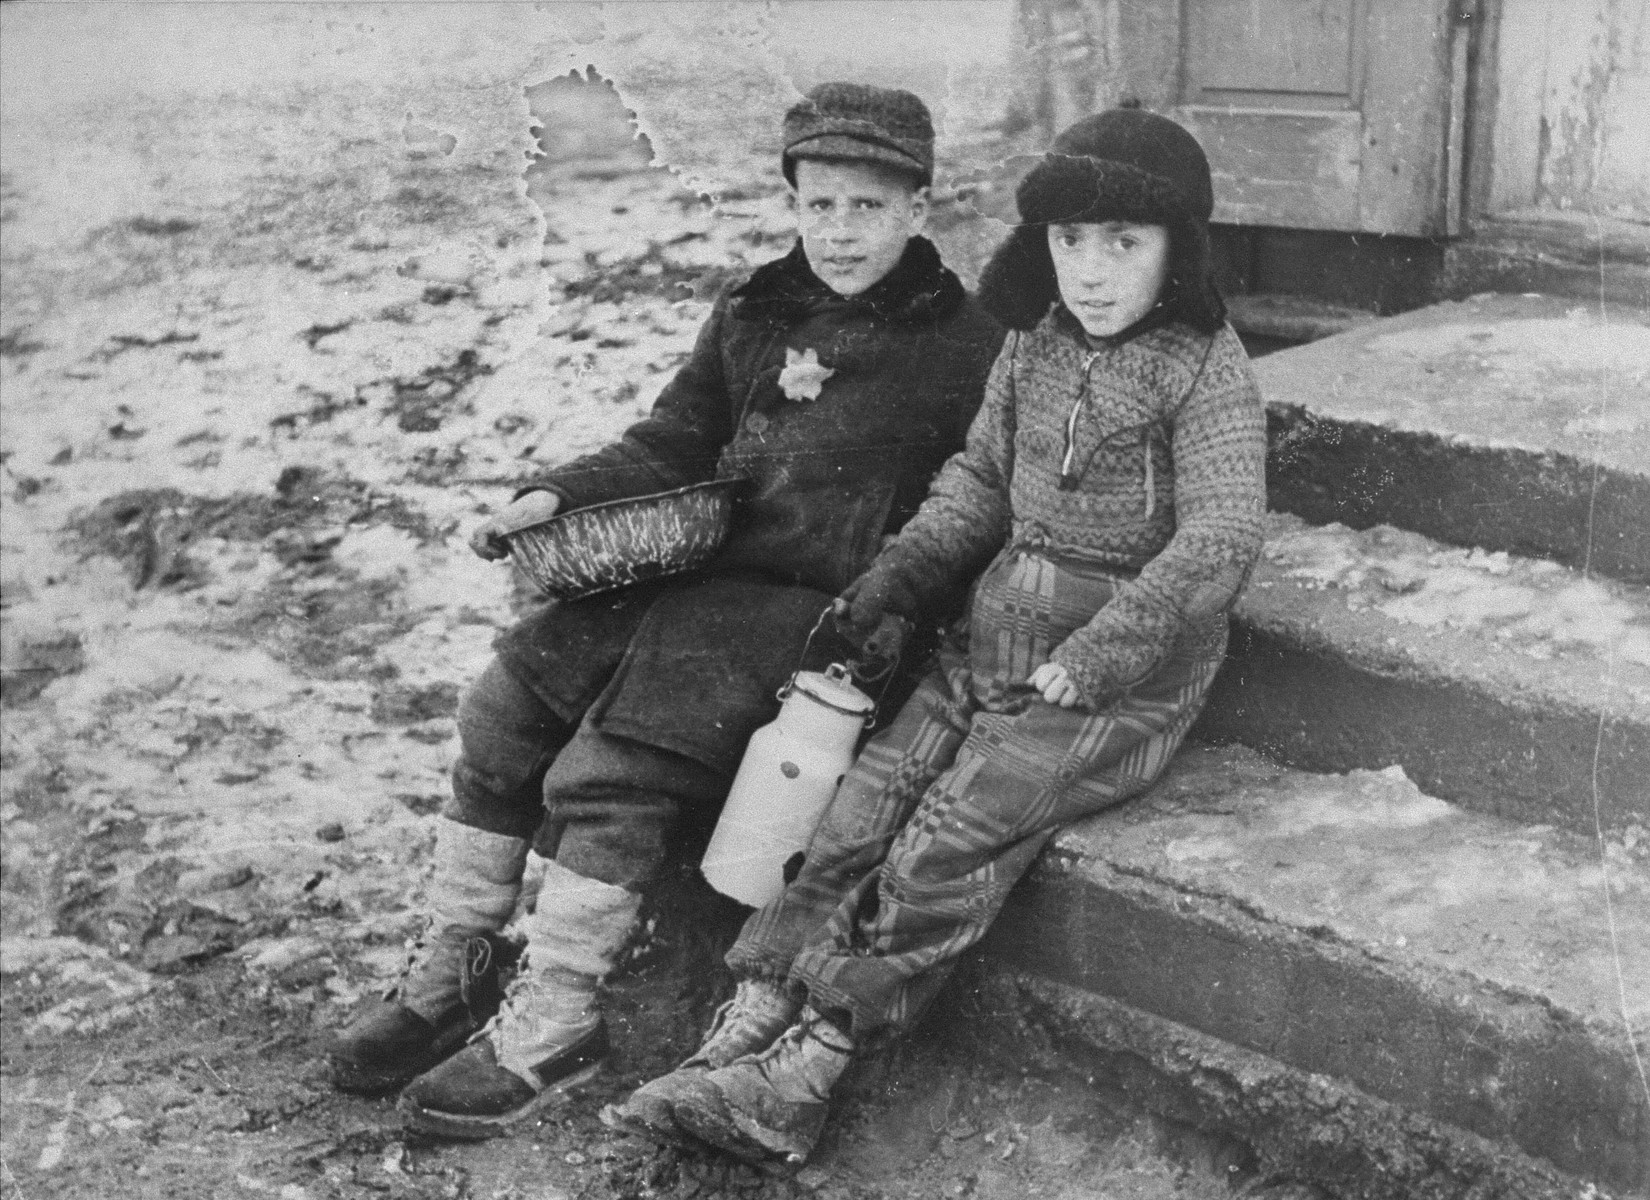 Portrait of two young boys with a milk can.

The caption by George Kadishon the back of the photo reads "Winter in the Kovno ghetto.  Early in the morning in line for soup".